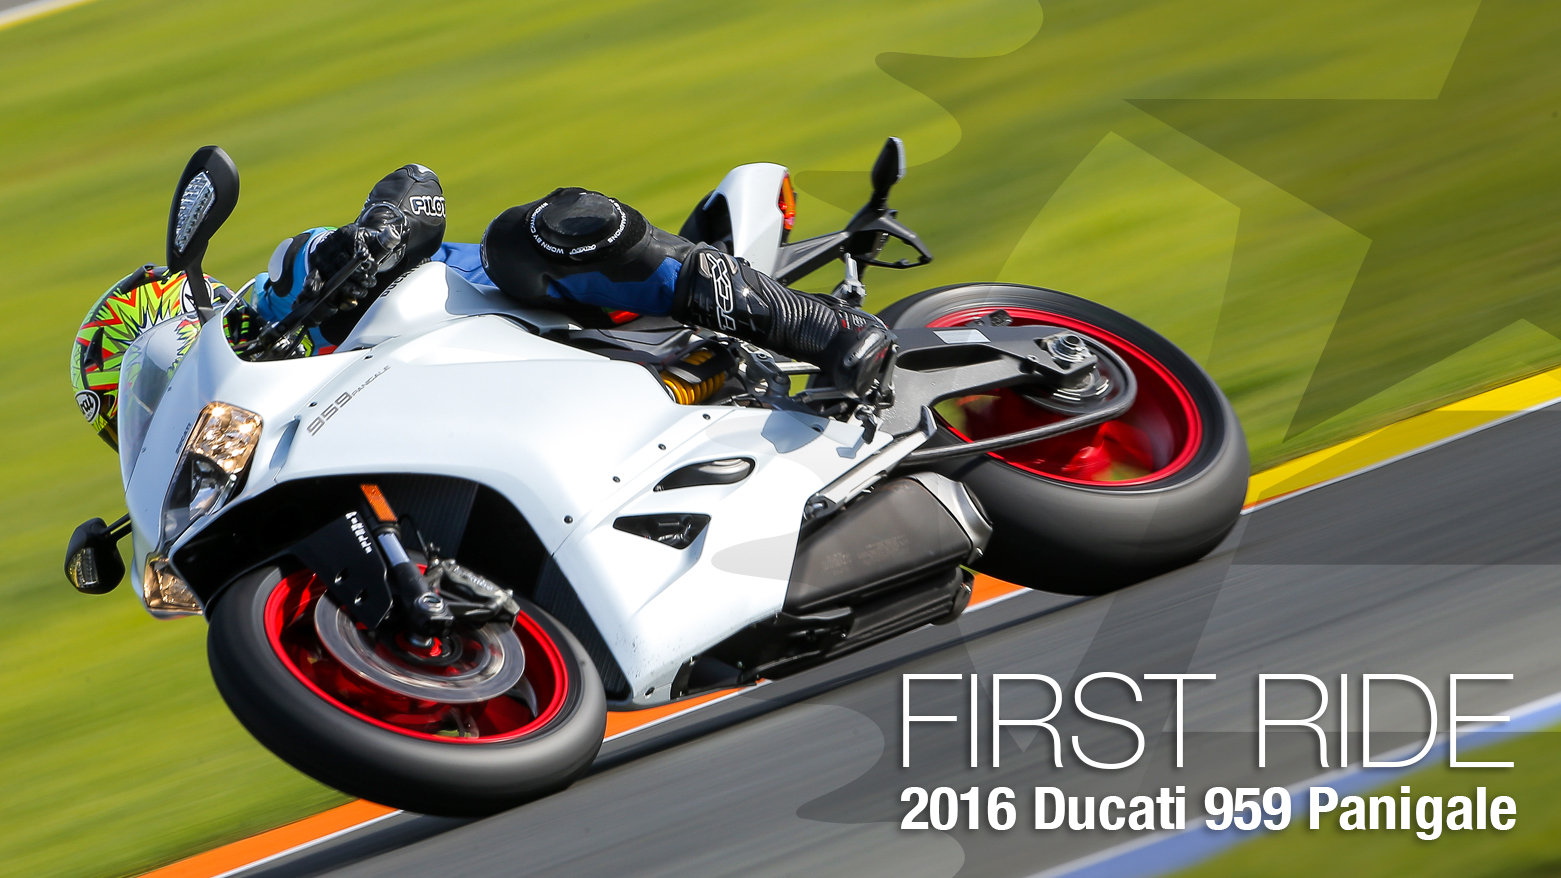 2016 Ducati 959 Panigale First Ride Review Video   Motorcycle USA